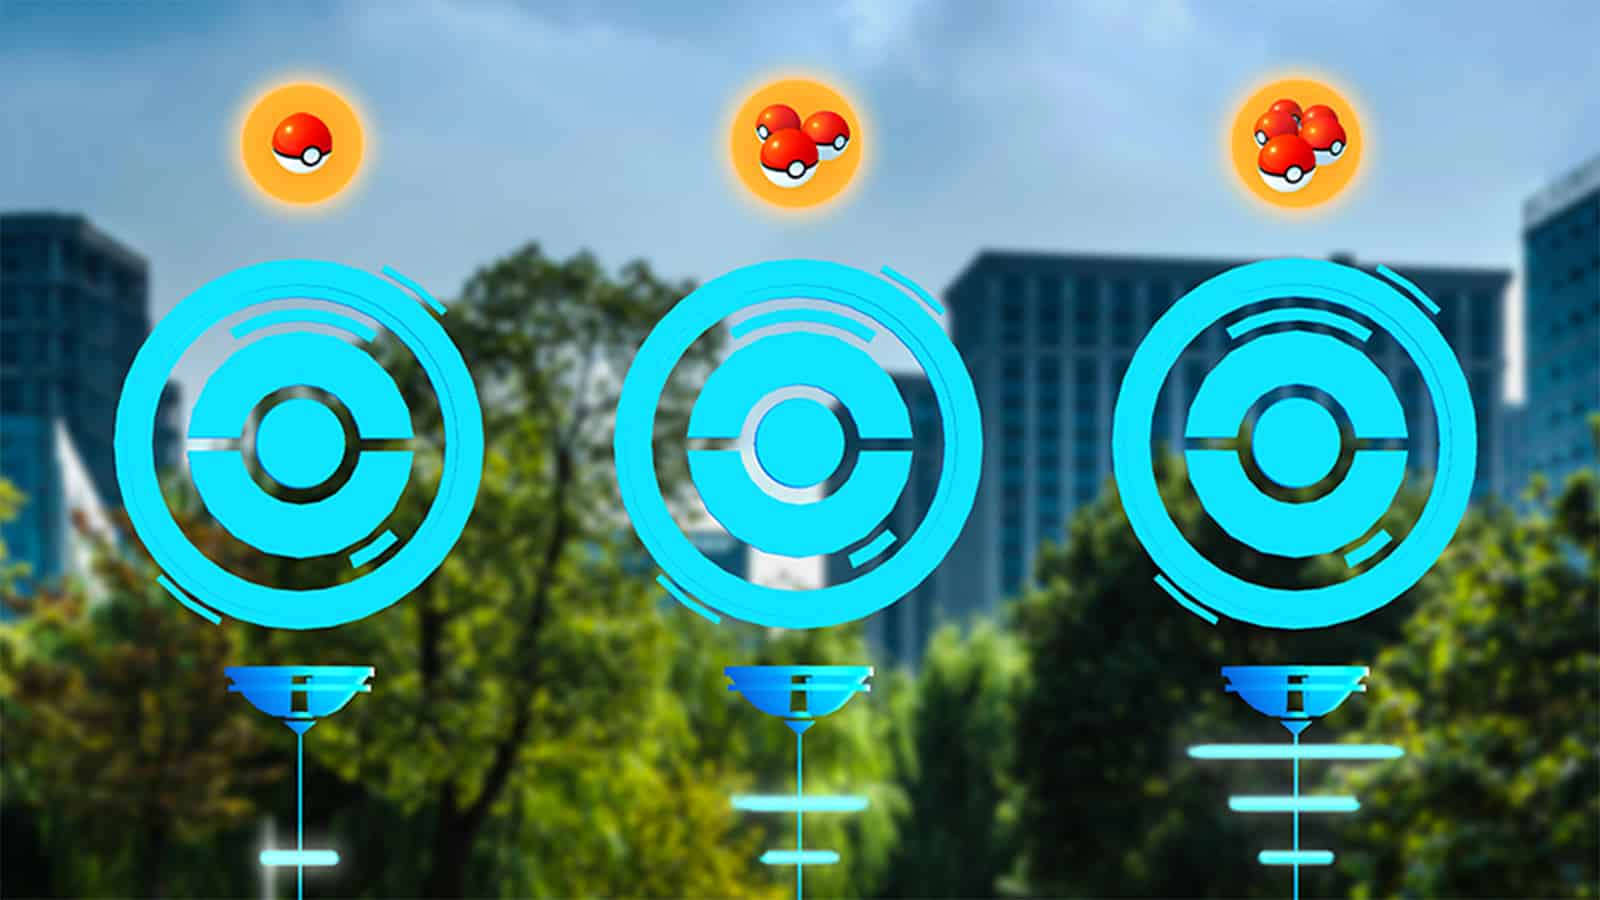 PokeStops that give out Field Research tasks